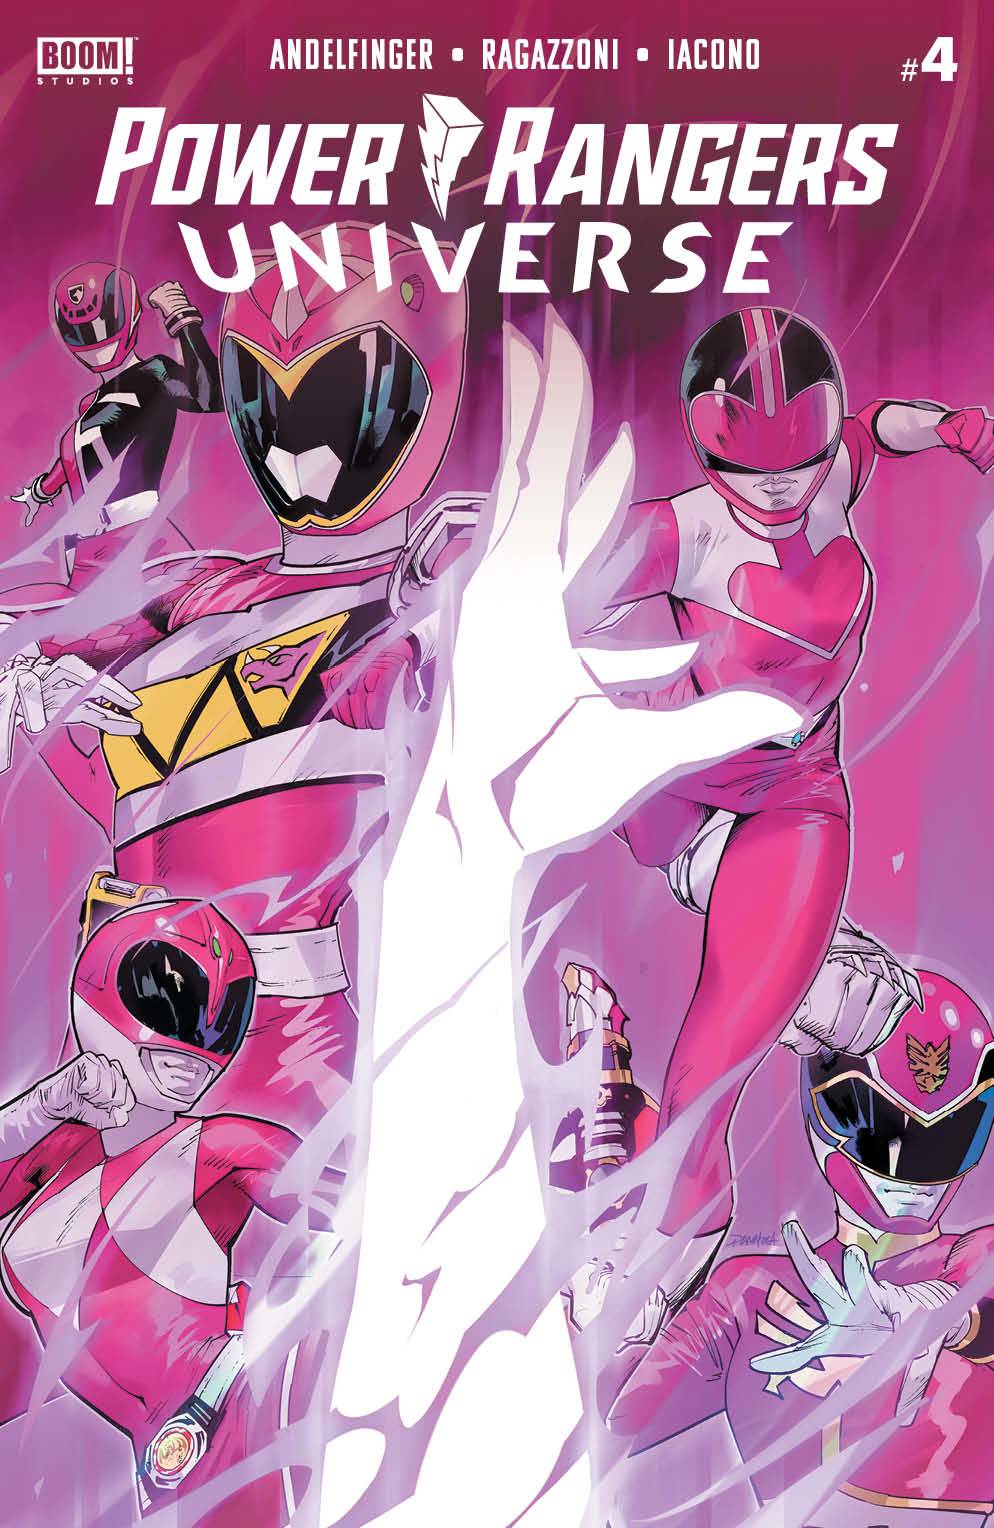 Power Rangers Universe #4 Cover A Mora (Of 6)